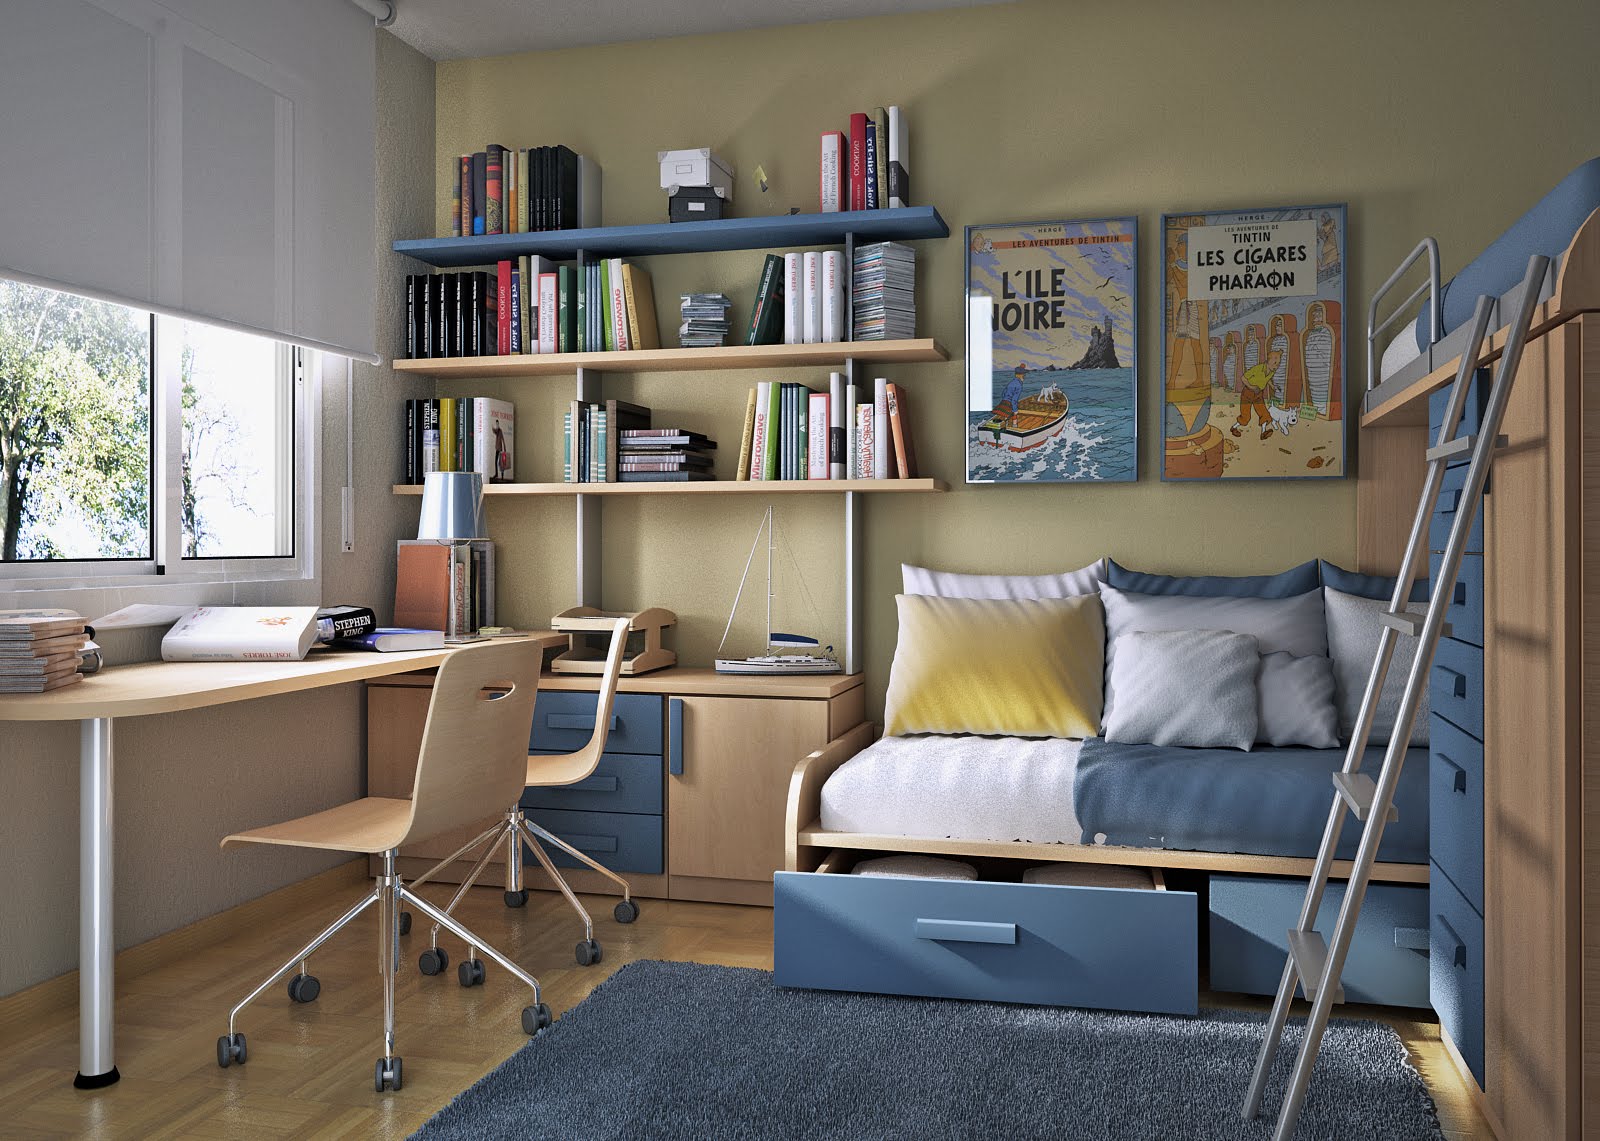 small-bedroom-furniture-ideas-also-awesome-bookshelves-design-plus-simple-workspace-with-swivel-side-chair-and-storage-idea-also-blue-color-interior-decorating